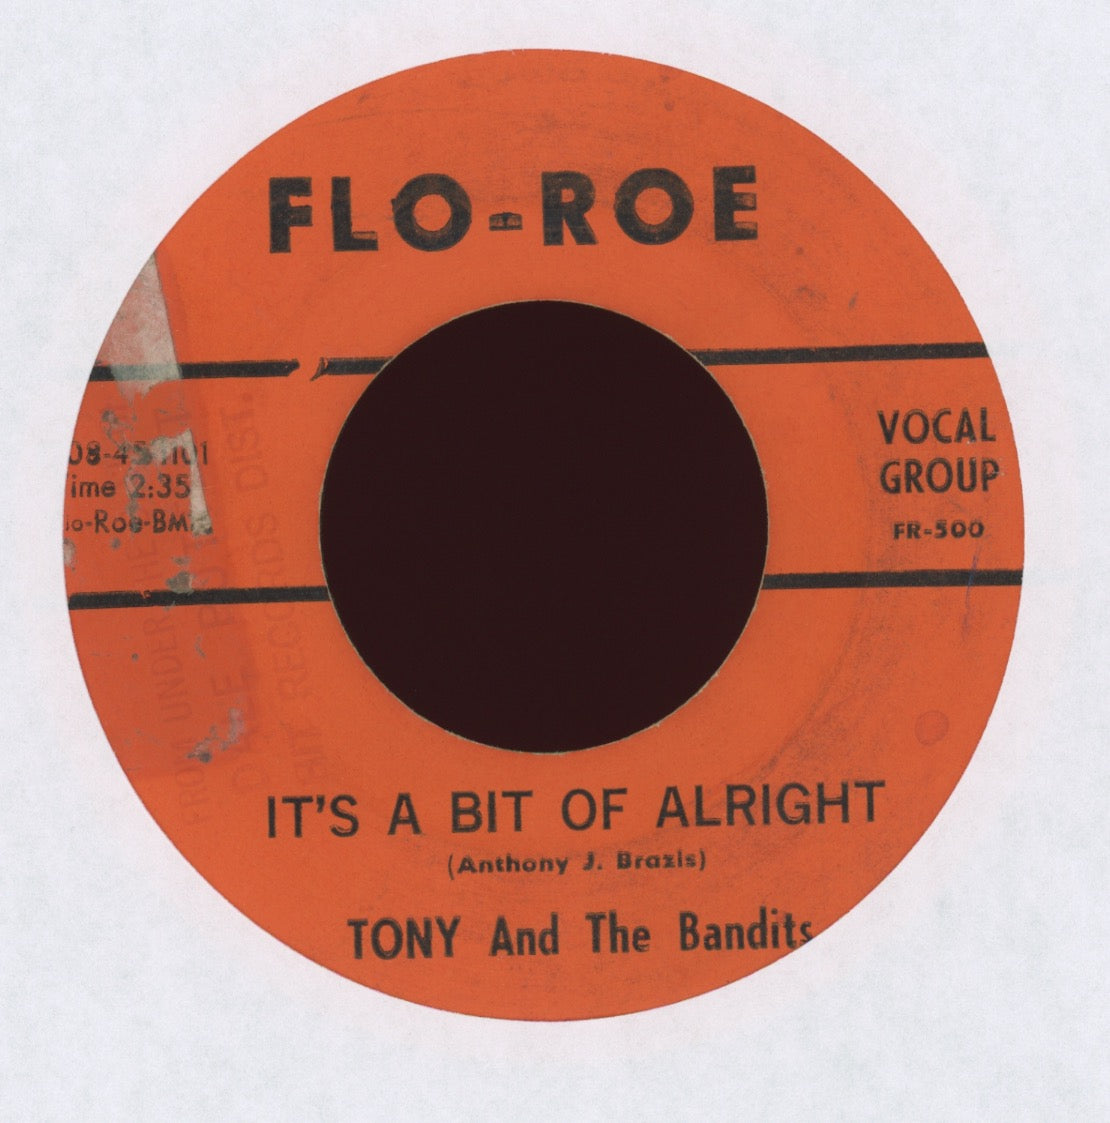 Tony And The Bandits - It's A Bit Of Alright on Flo-Roe